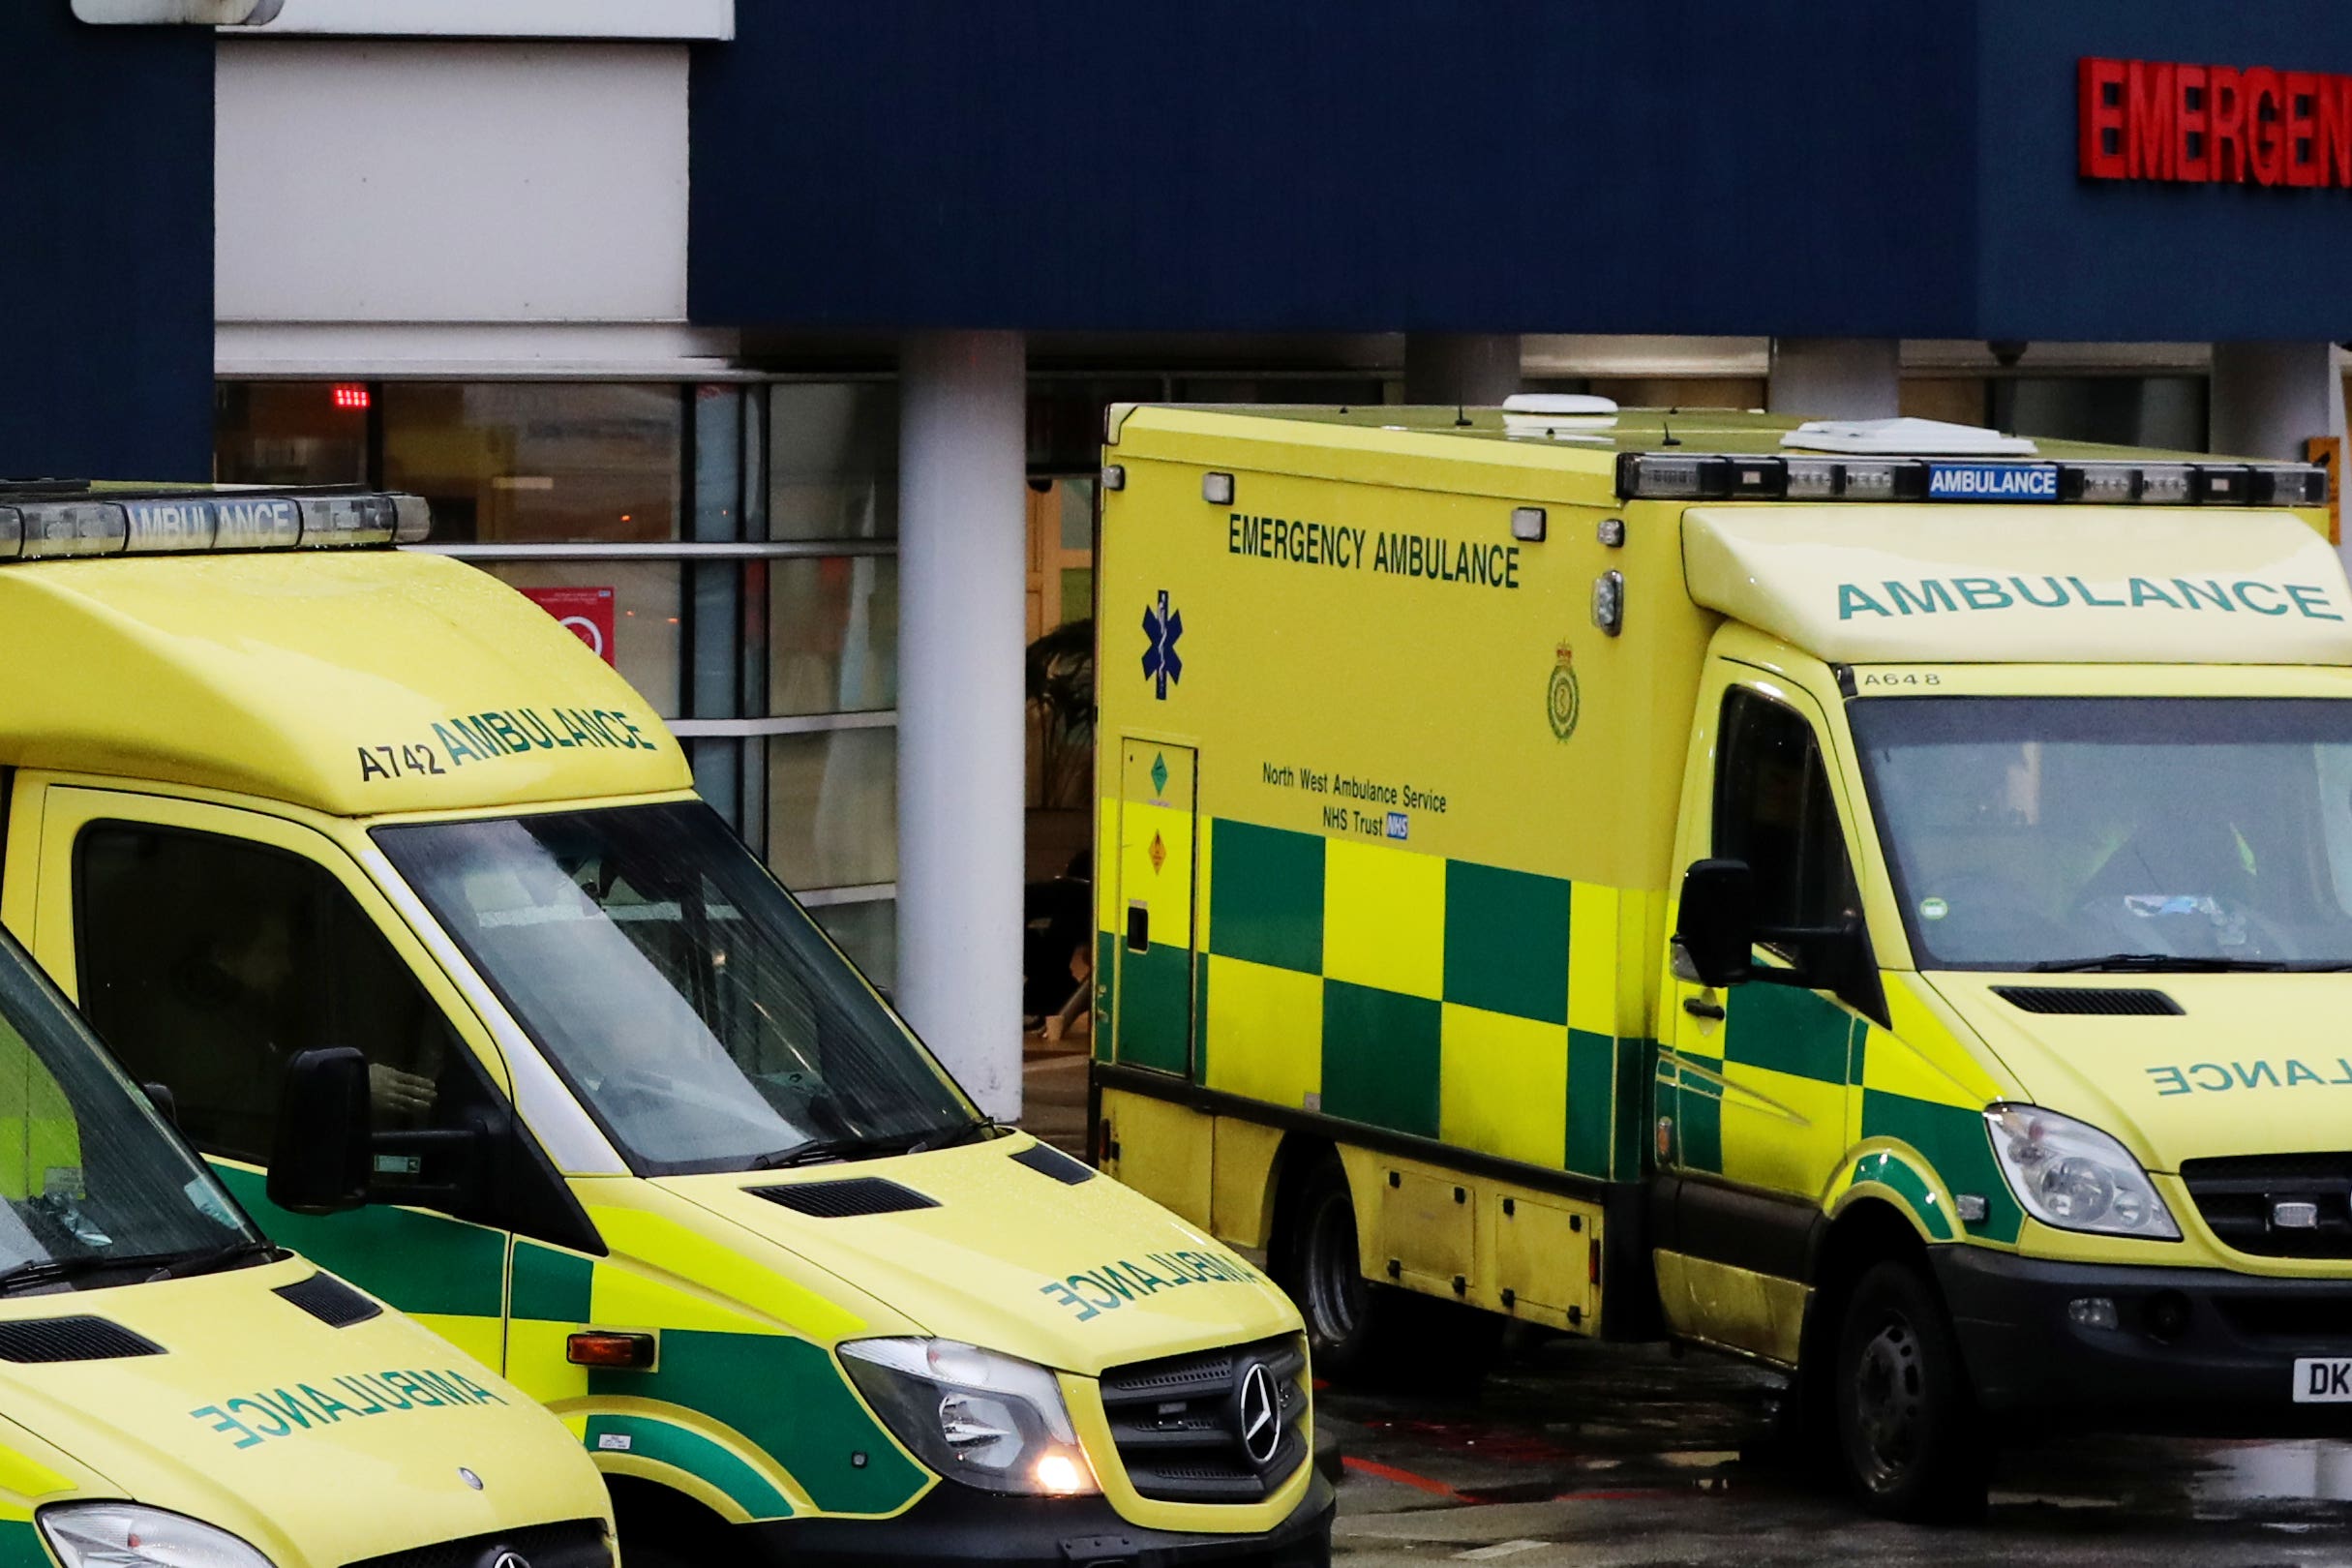 Patients are also facing record-long waits for ambulances